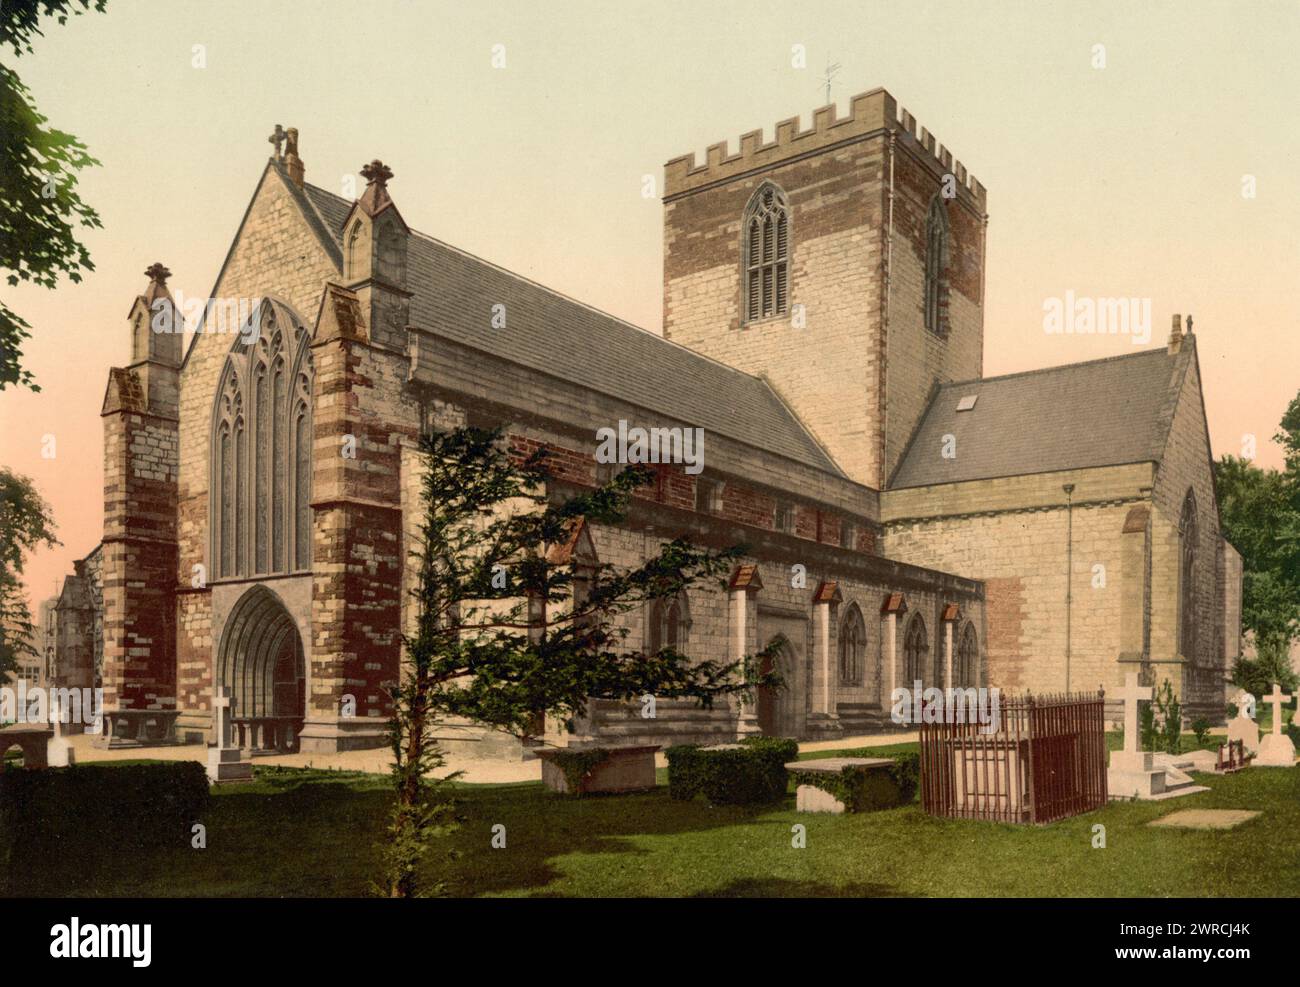 Cathedral, St. Asaph, Wales, between ca. 1890 and ca. 1900., Wales, St. Asaph, Color, 1890-1900 Stock Photo